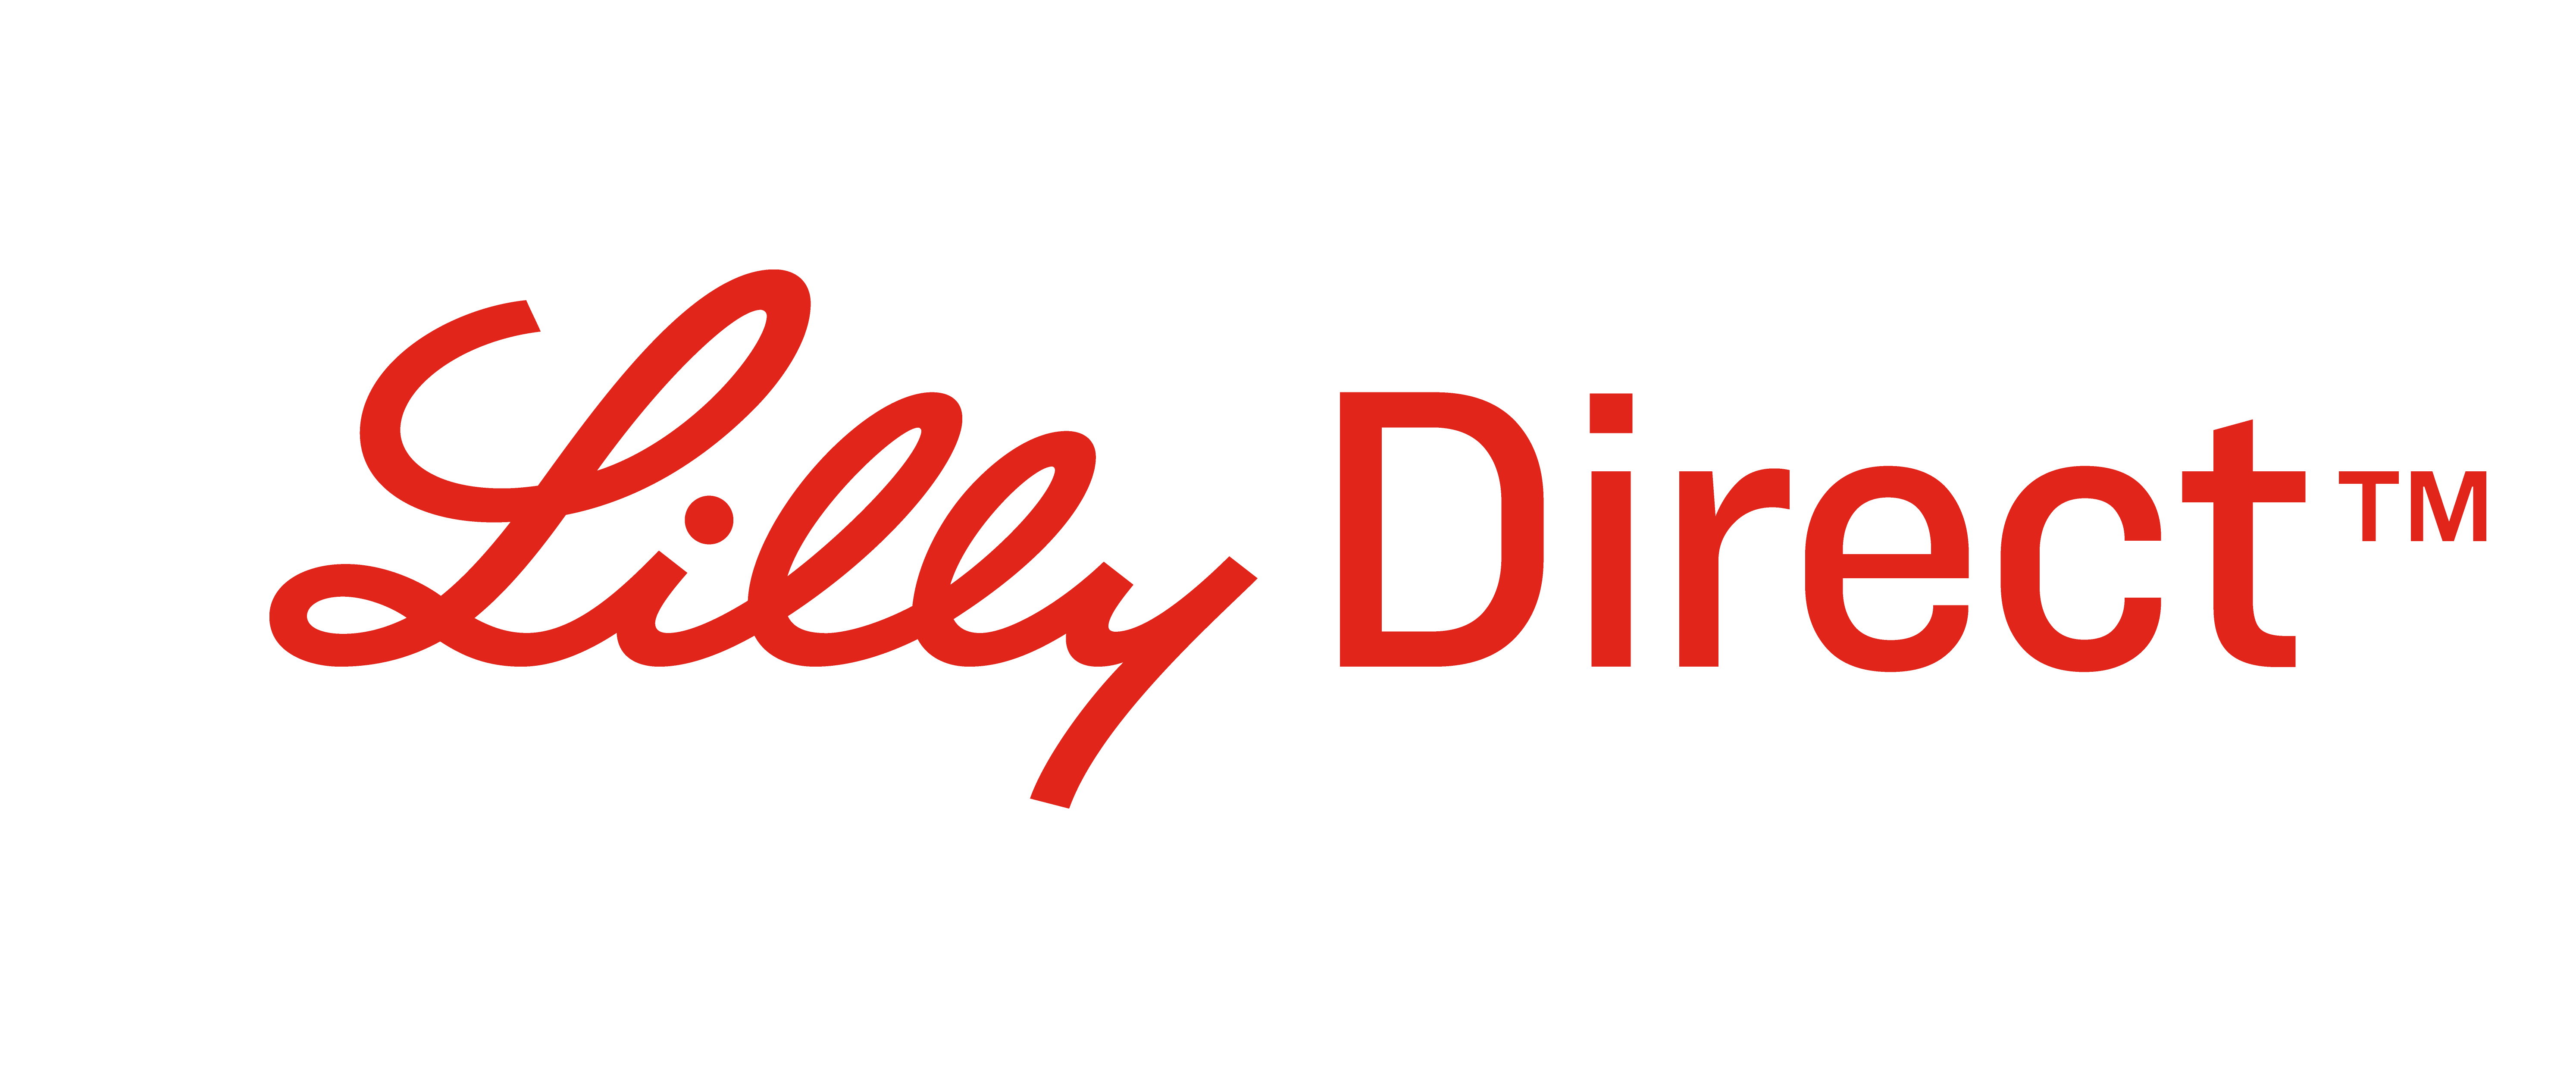 Lilly Direct logo